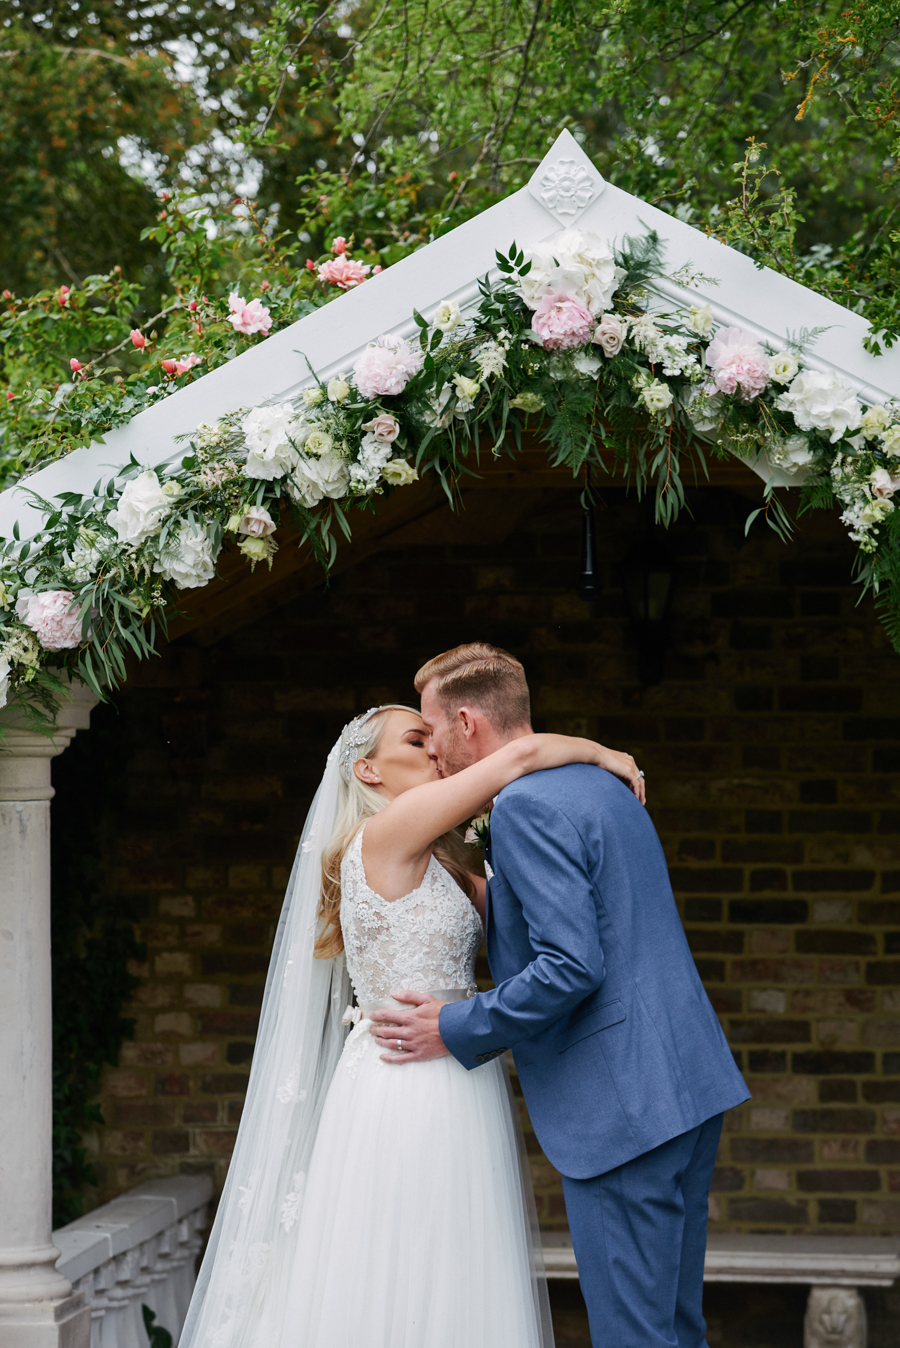 Penny and Ben's funfair wedding at Marleybrook with Rose Images (15)